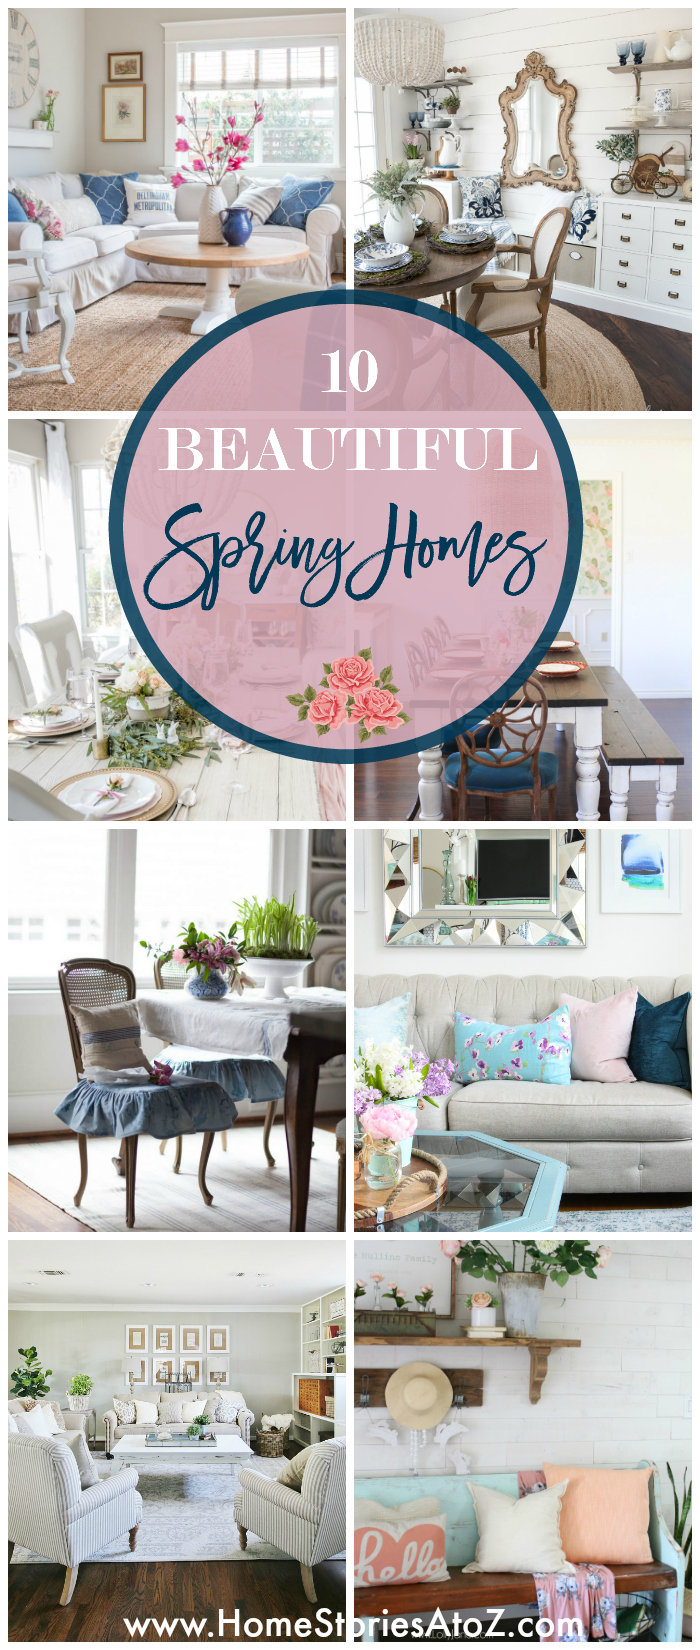 10 Beautiful Spring Home Tours